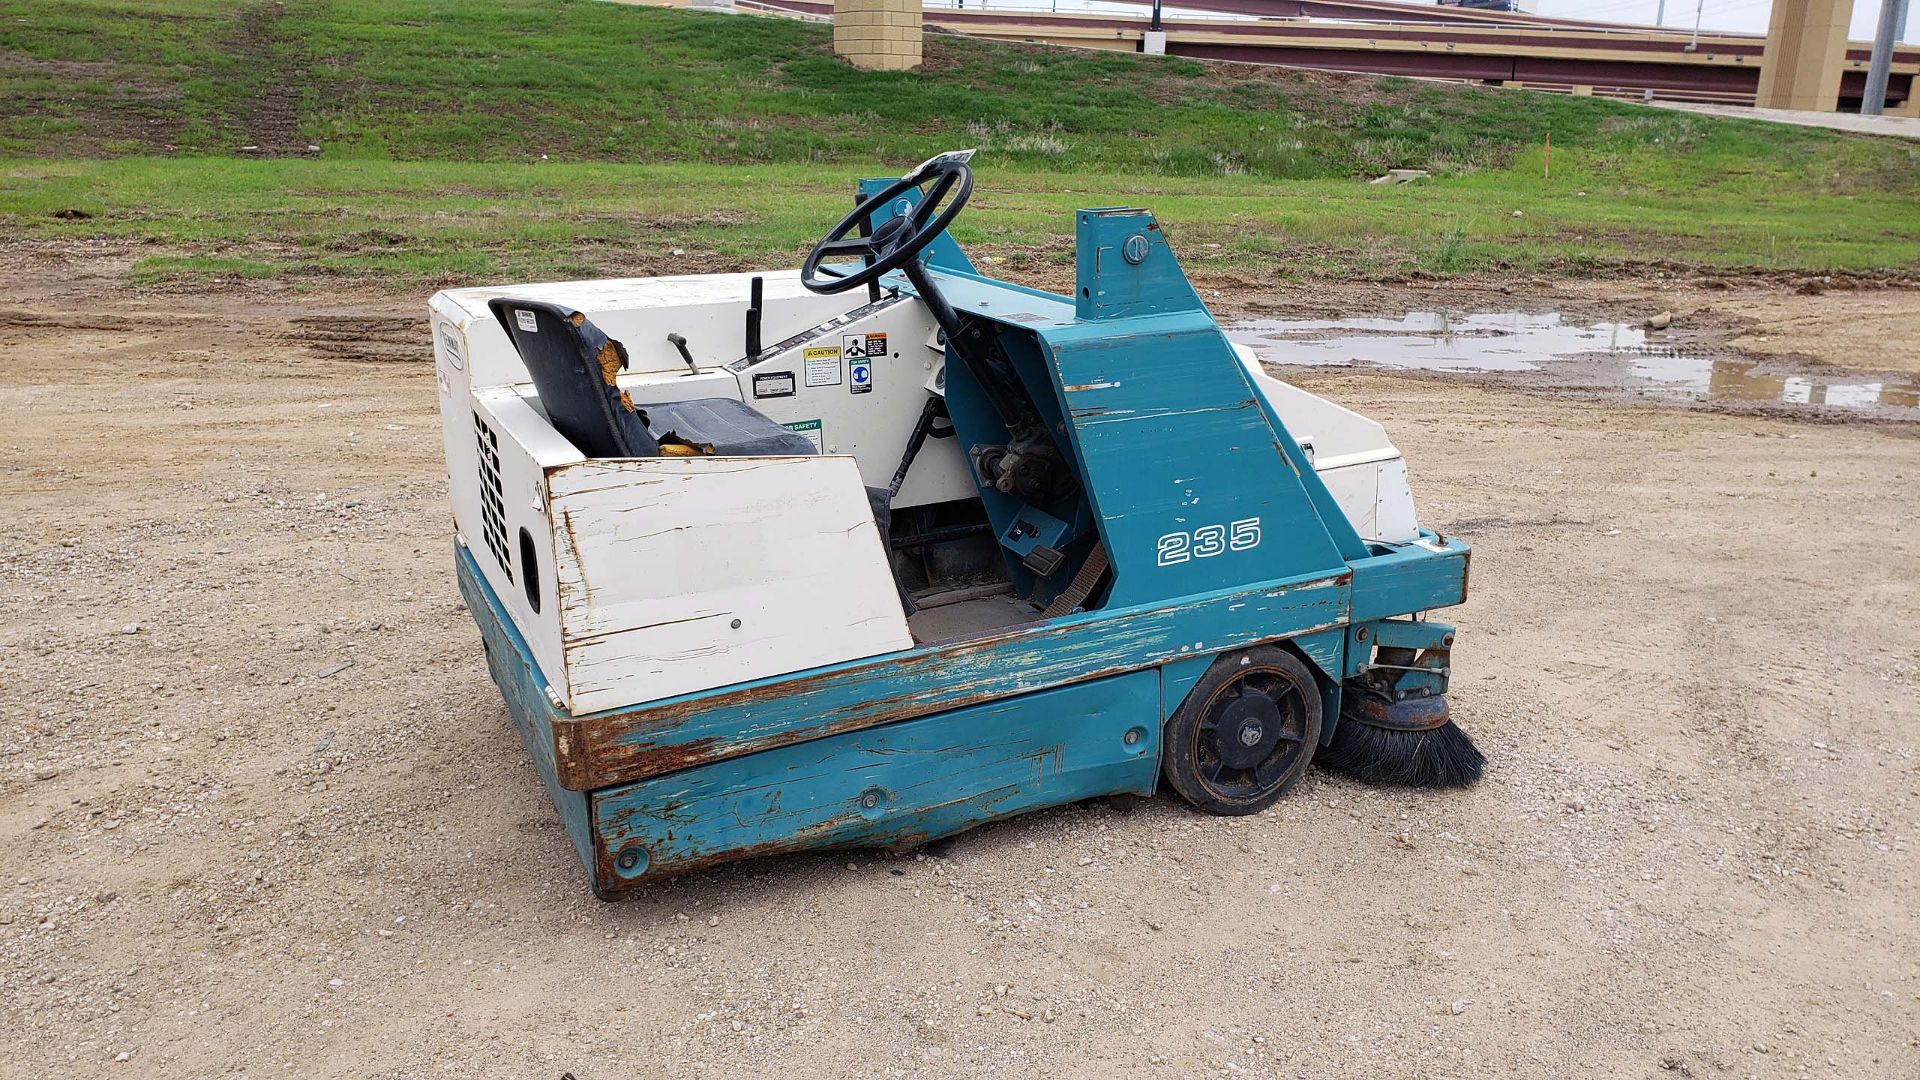 SWEEPER, TENNANT 235, LPG engine, 1,336 H.O.M., S/N 235-2322 (Note: Non-Running) (Located at: Dallas